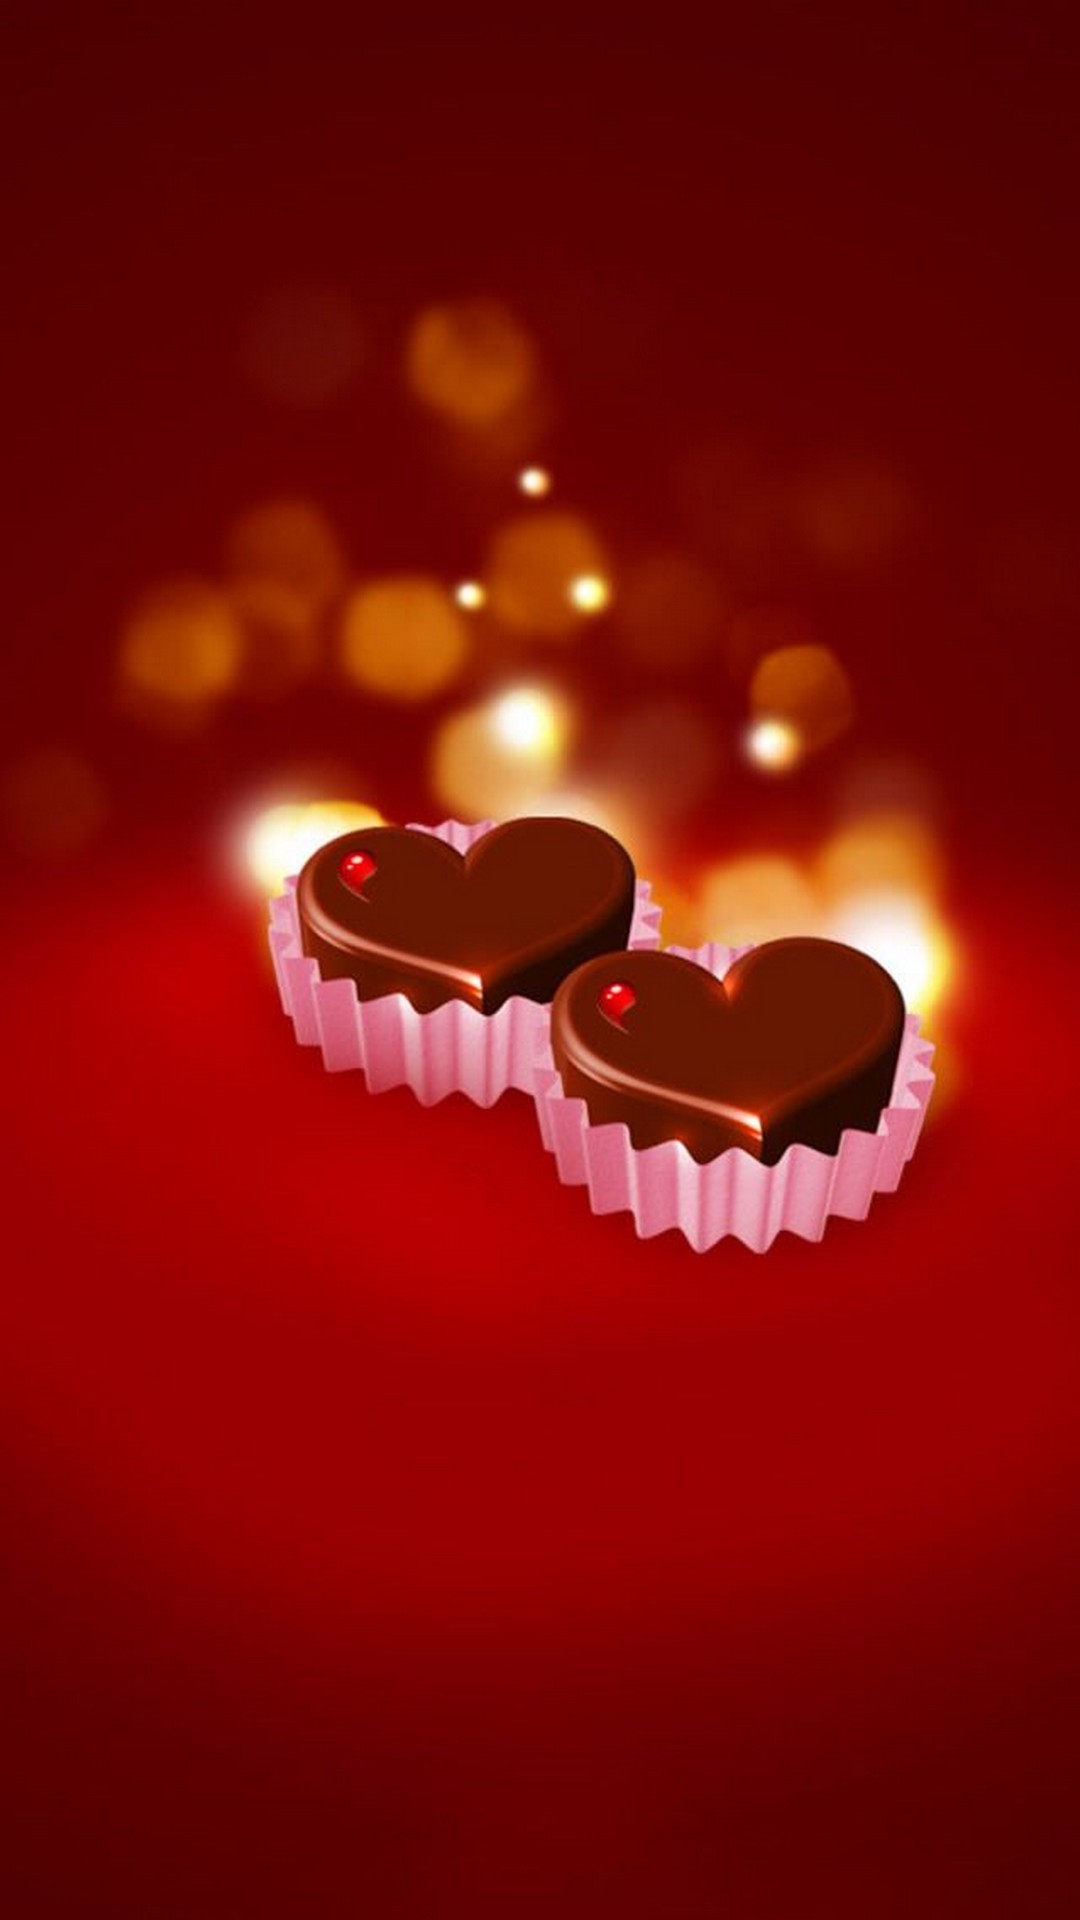 Wallpaper Valentines Day Android with HD resolution 1080x1920